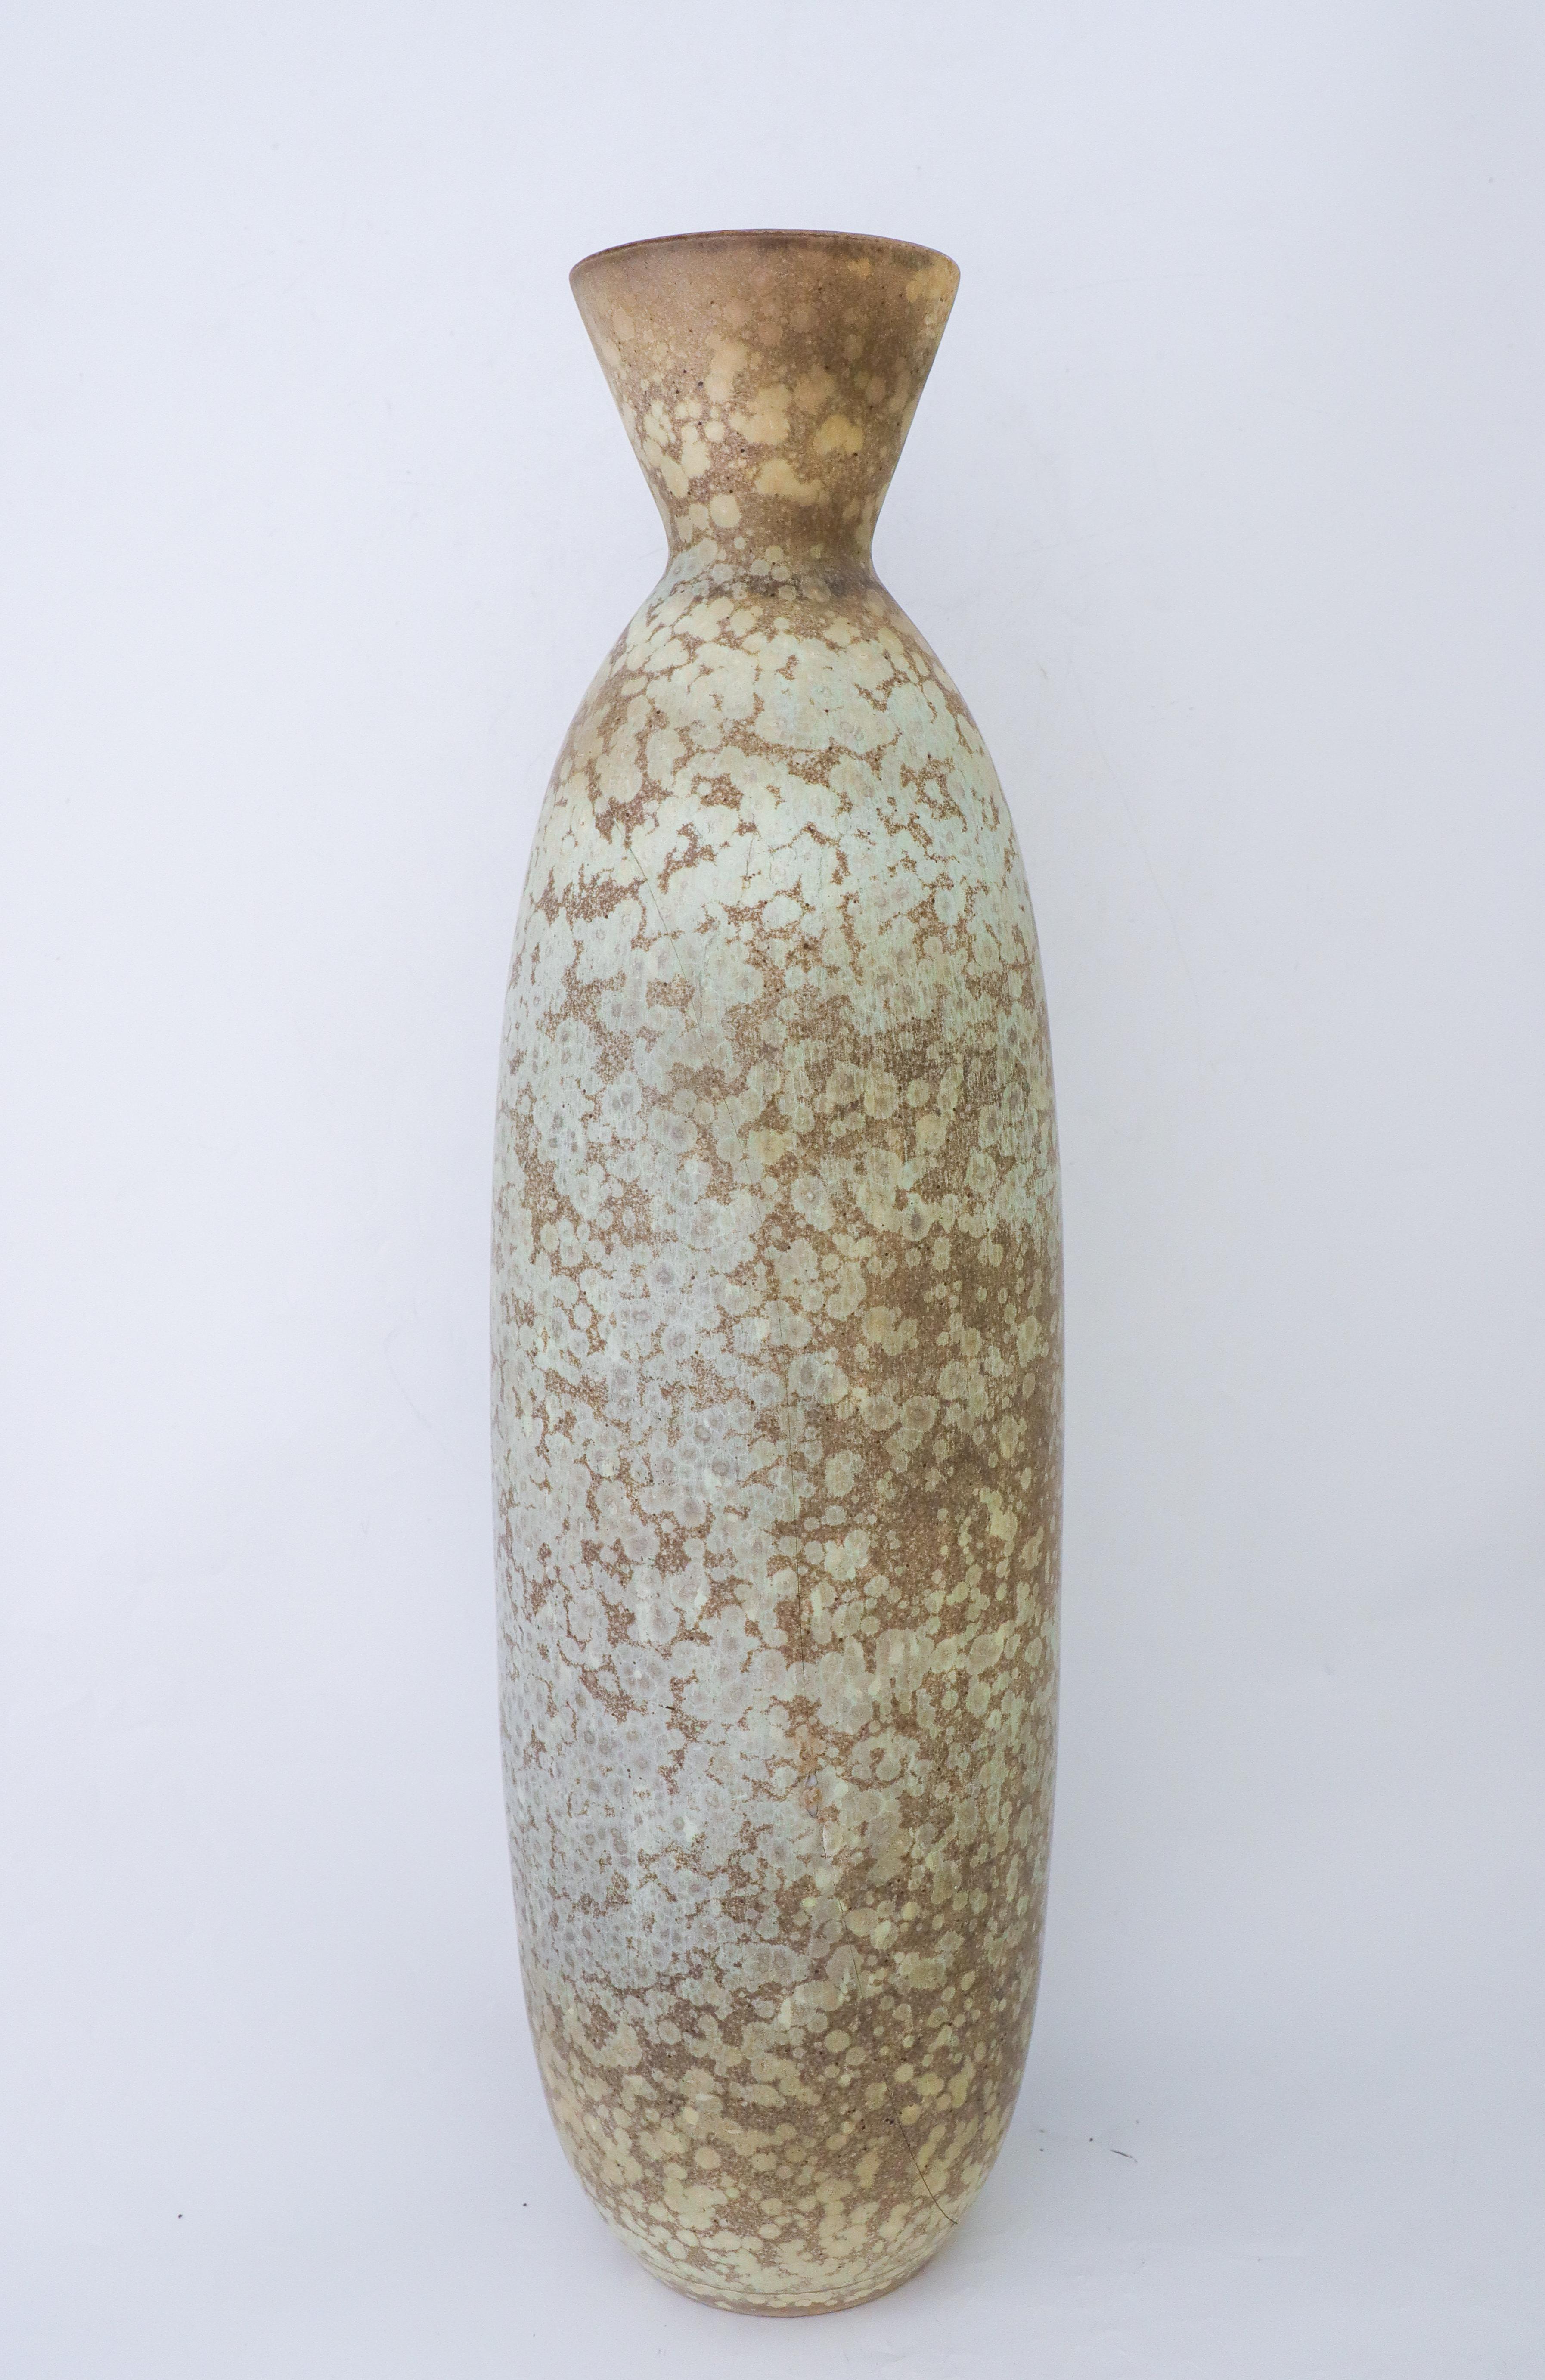 A large floor vase with a spectacular gray-speckled glaze designed by Carl-Harry Stålhane at Rörstrand. The vase is 62 cm (24,8